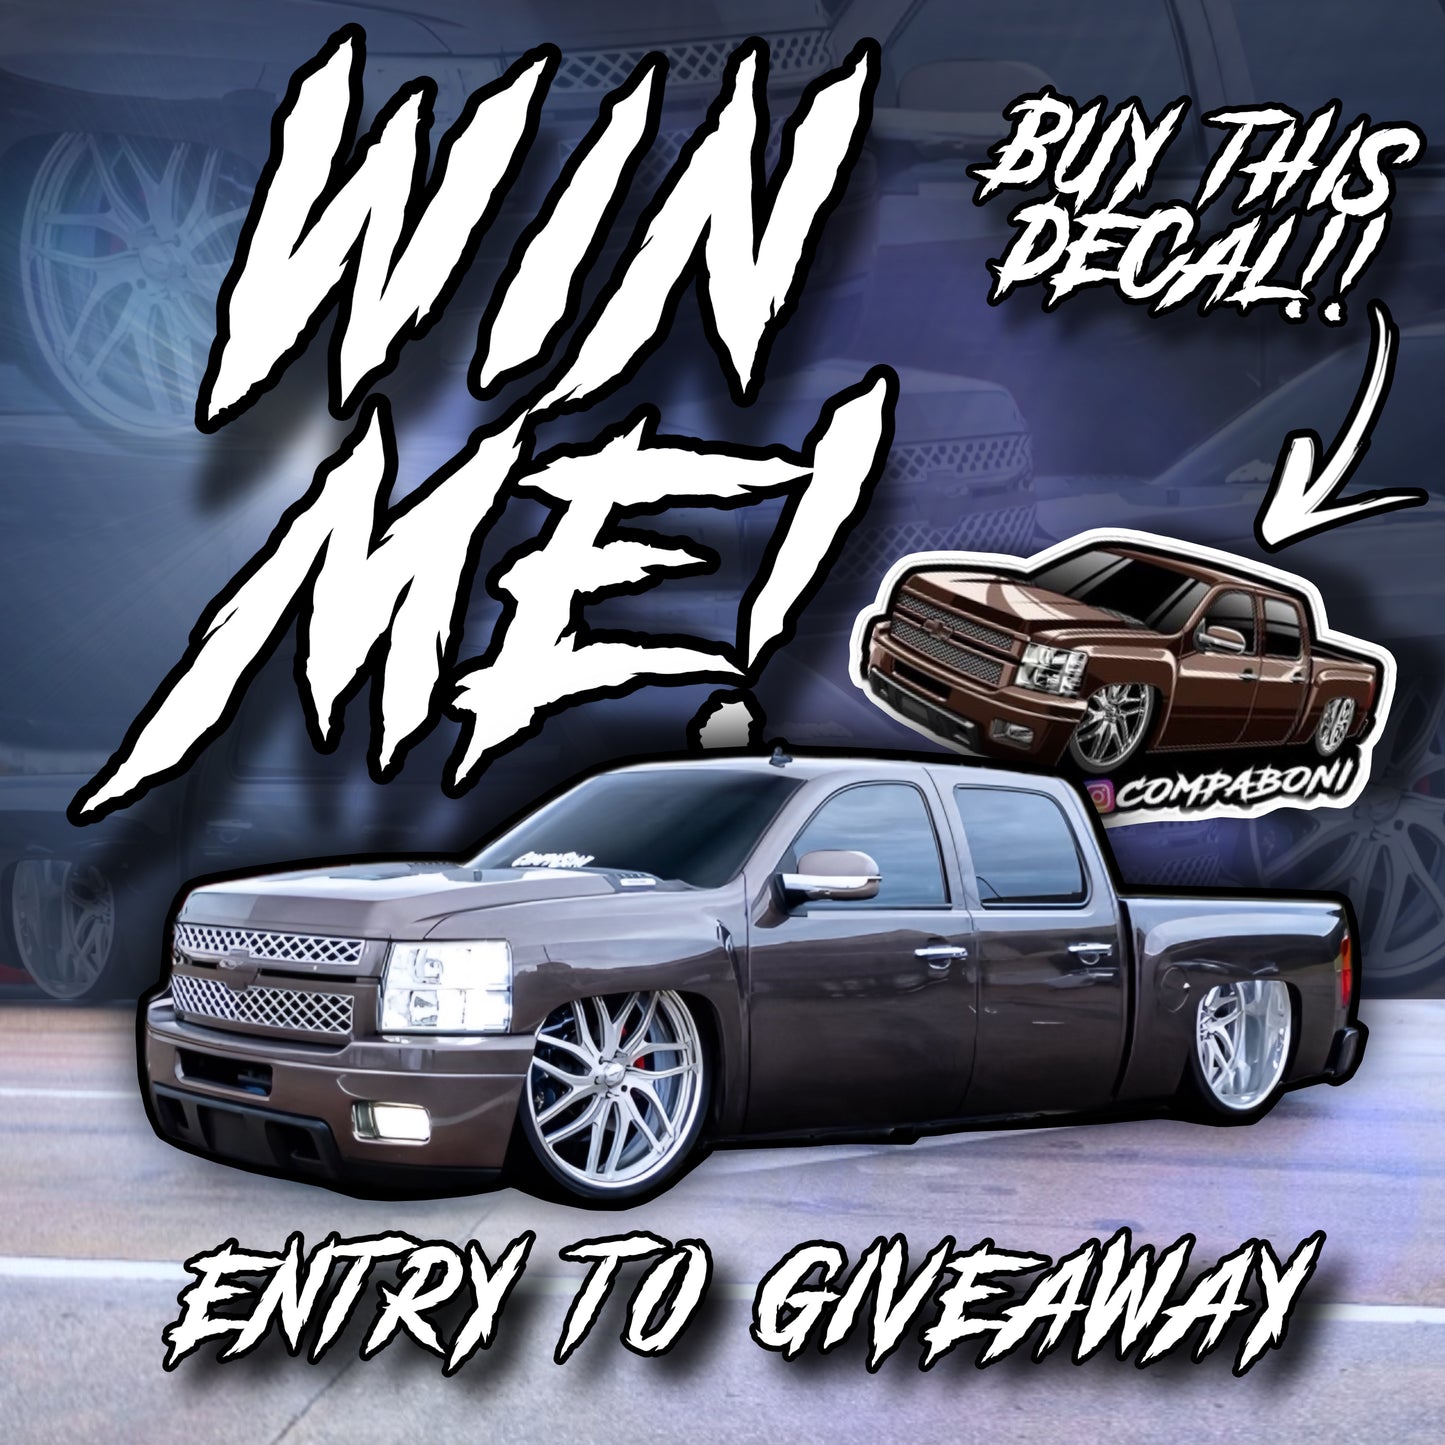 ENTRY TO BAGGED TRUCK GIVEAWAY DECAL